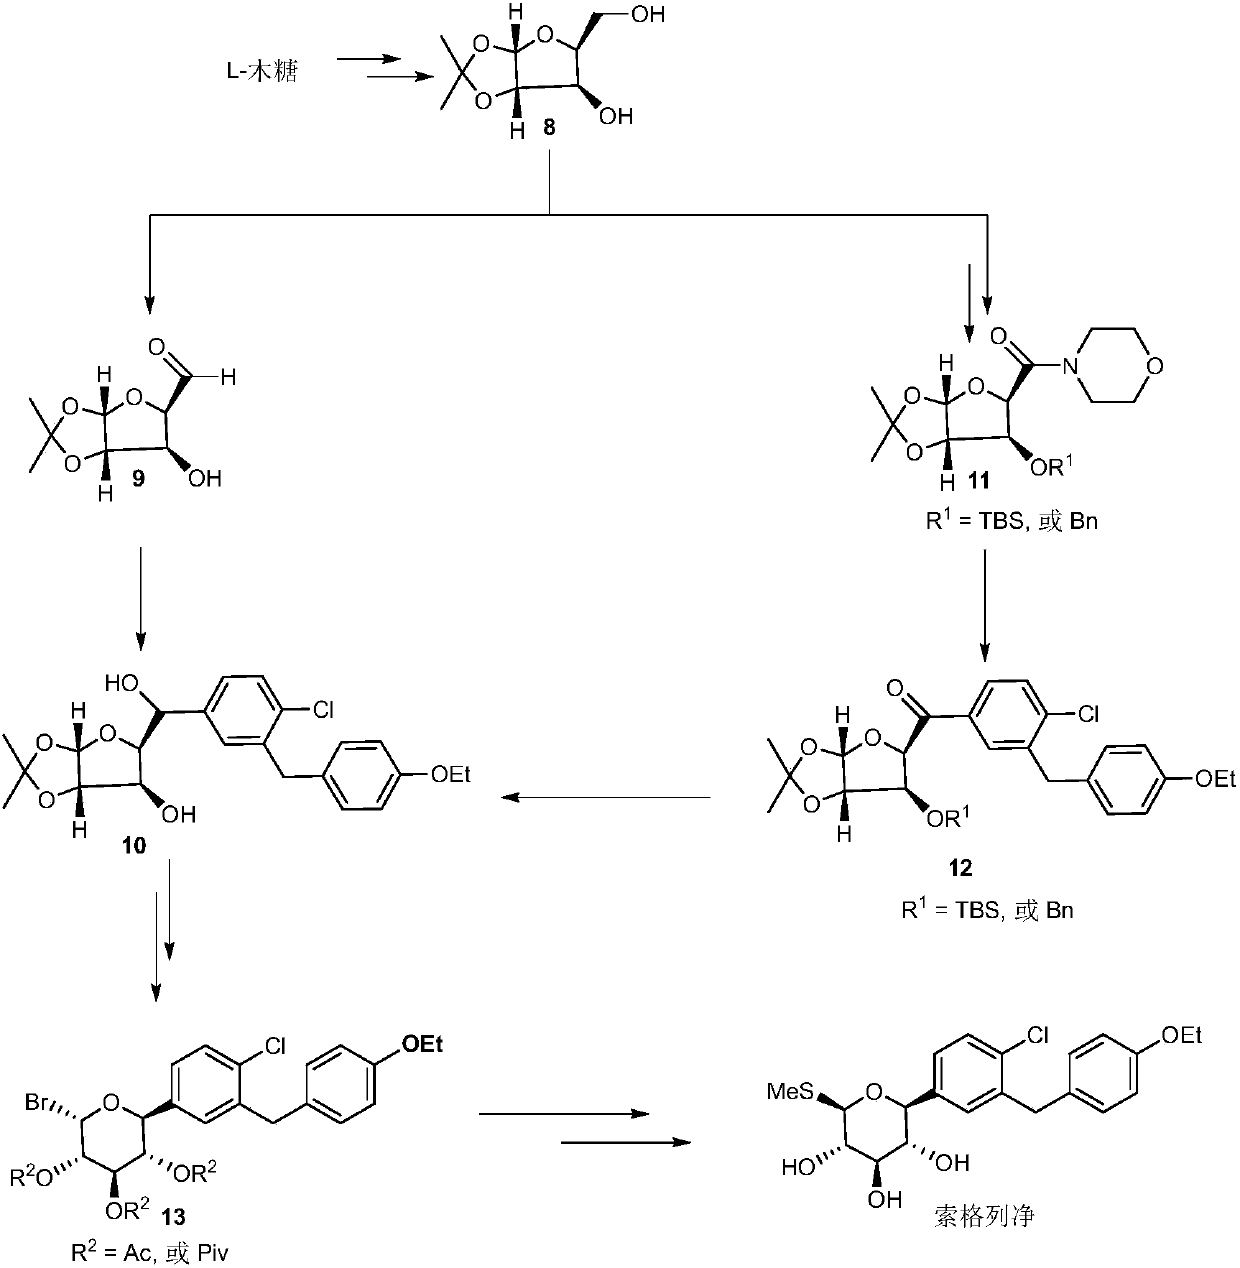 Synthetic method for sotagliflozin and its analogues